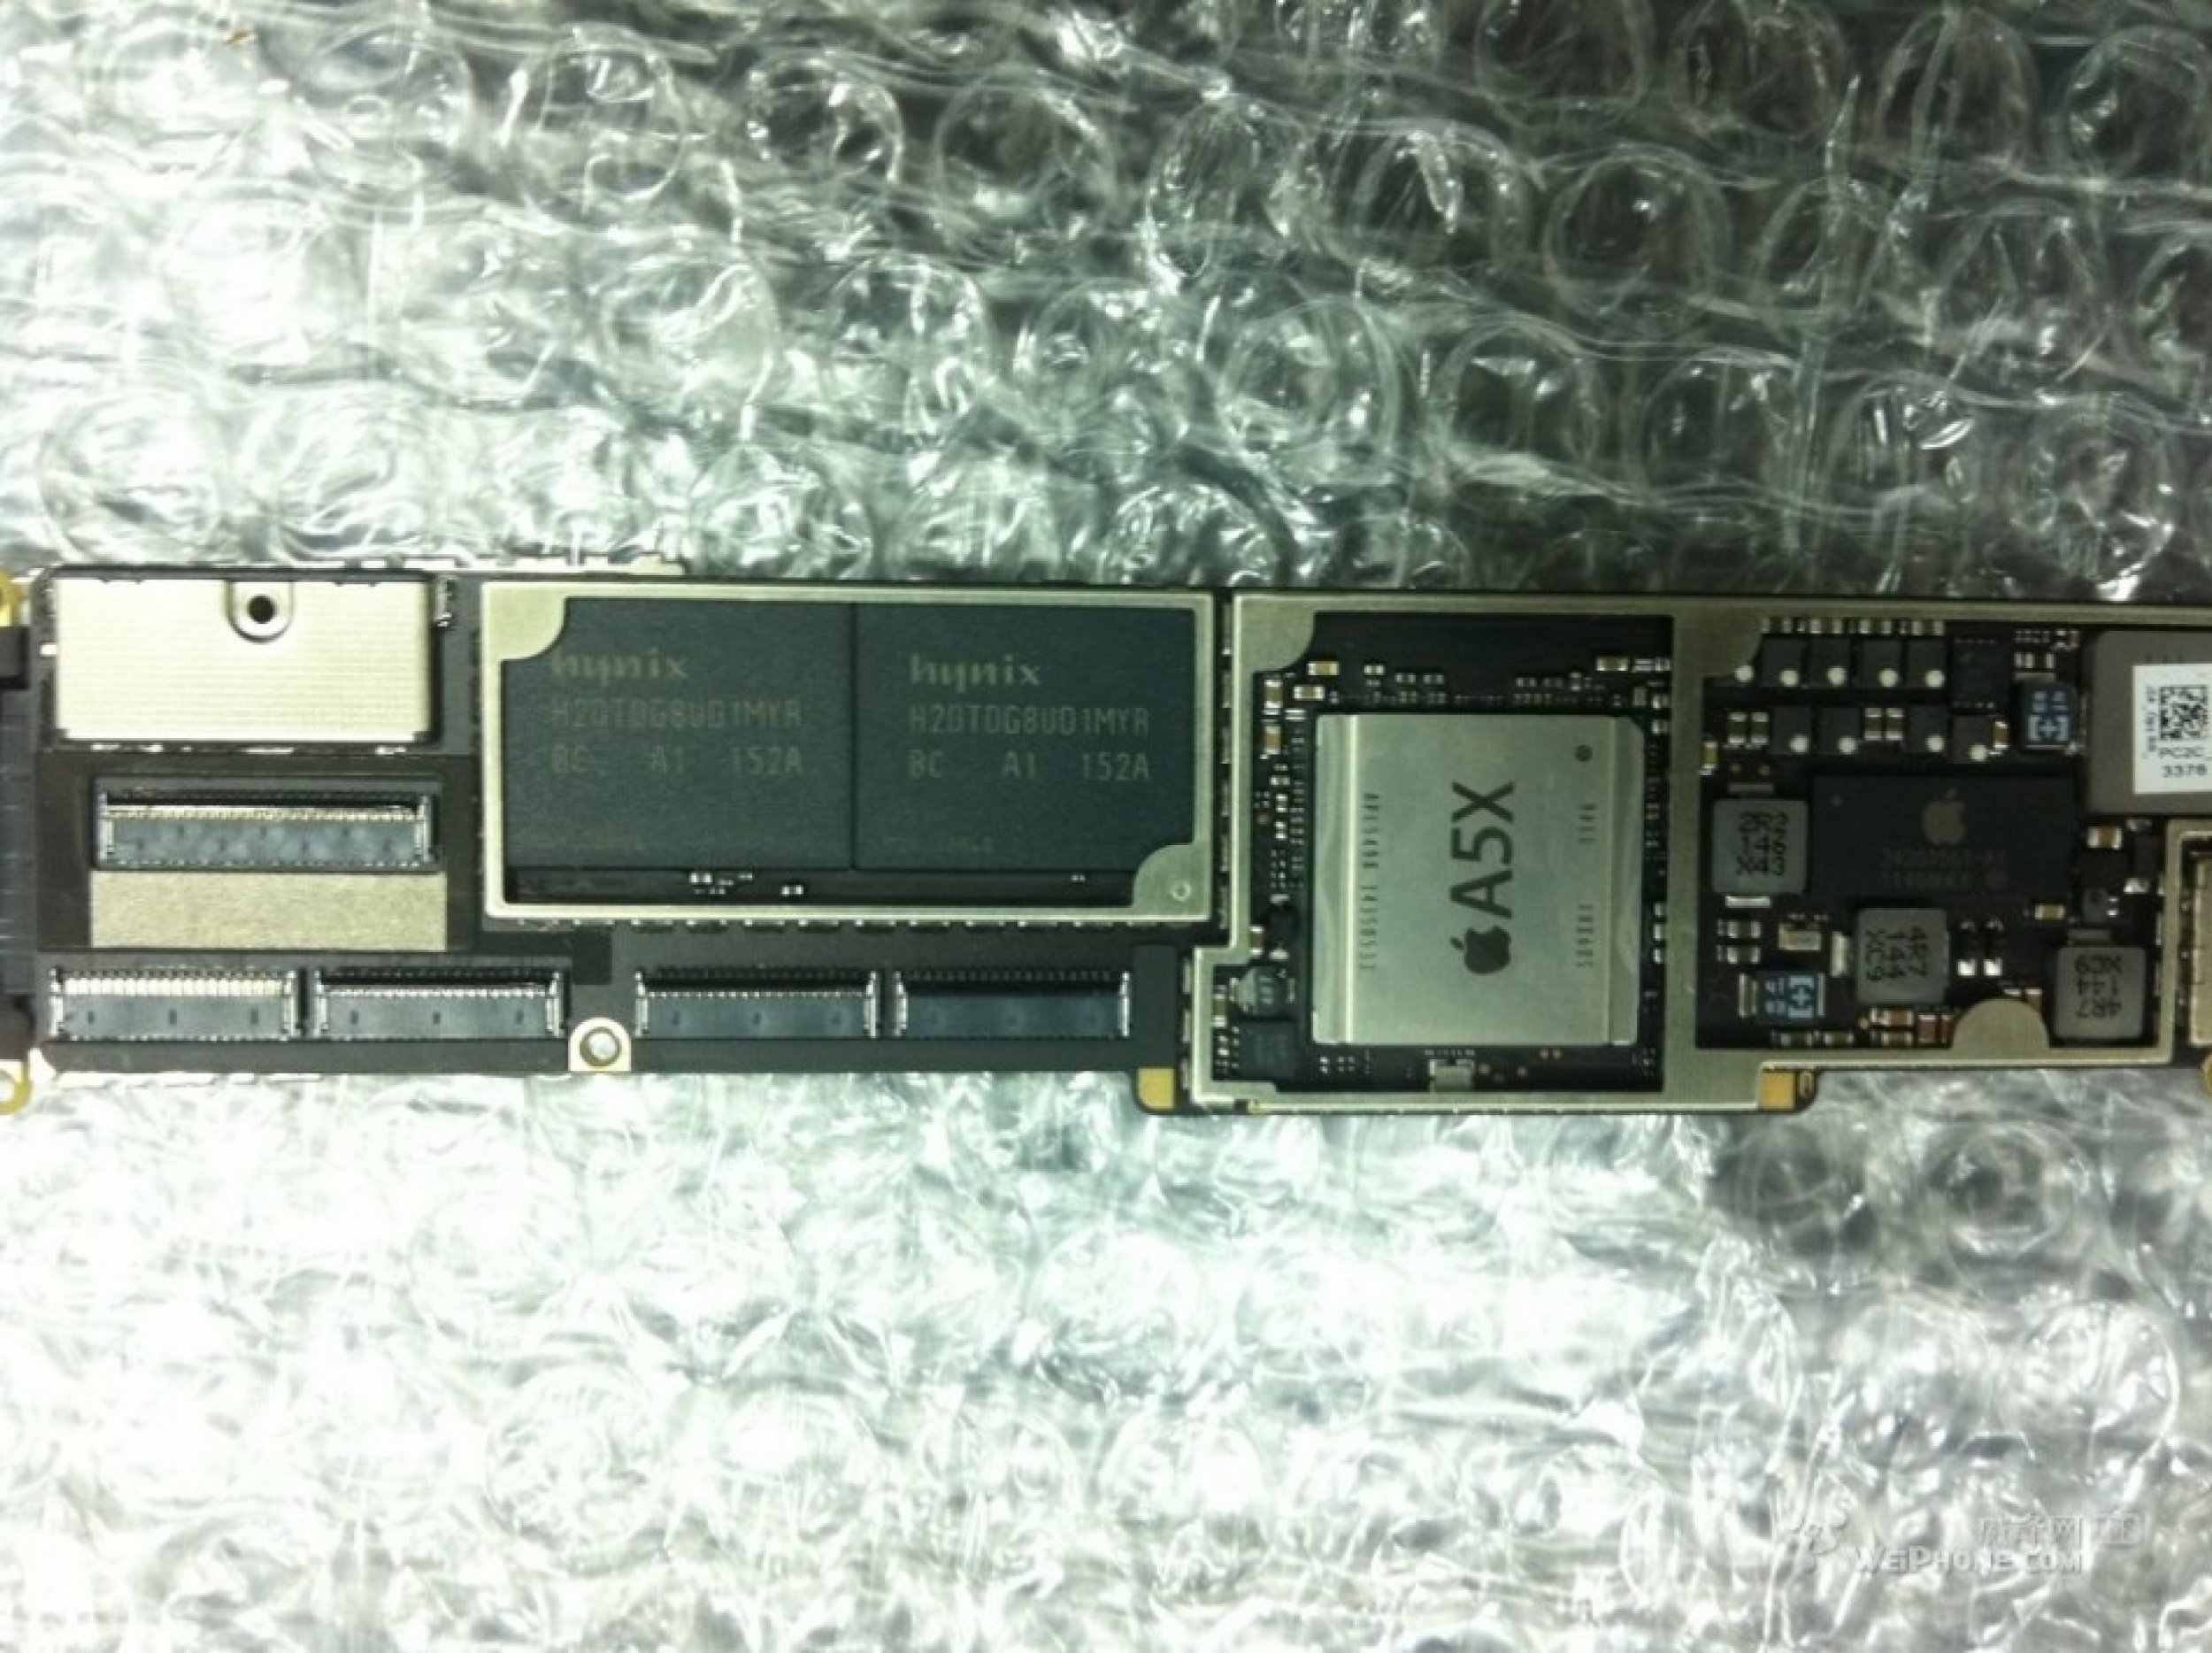 iPad 3 Rumor Leaked Logic Board Photo Revealed A5X Chip, Not A6